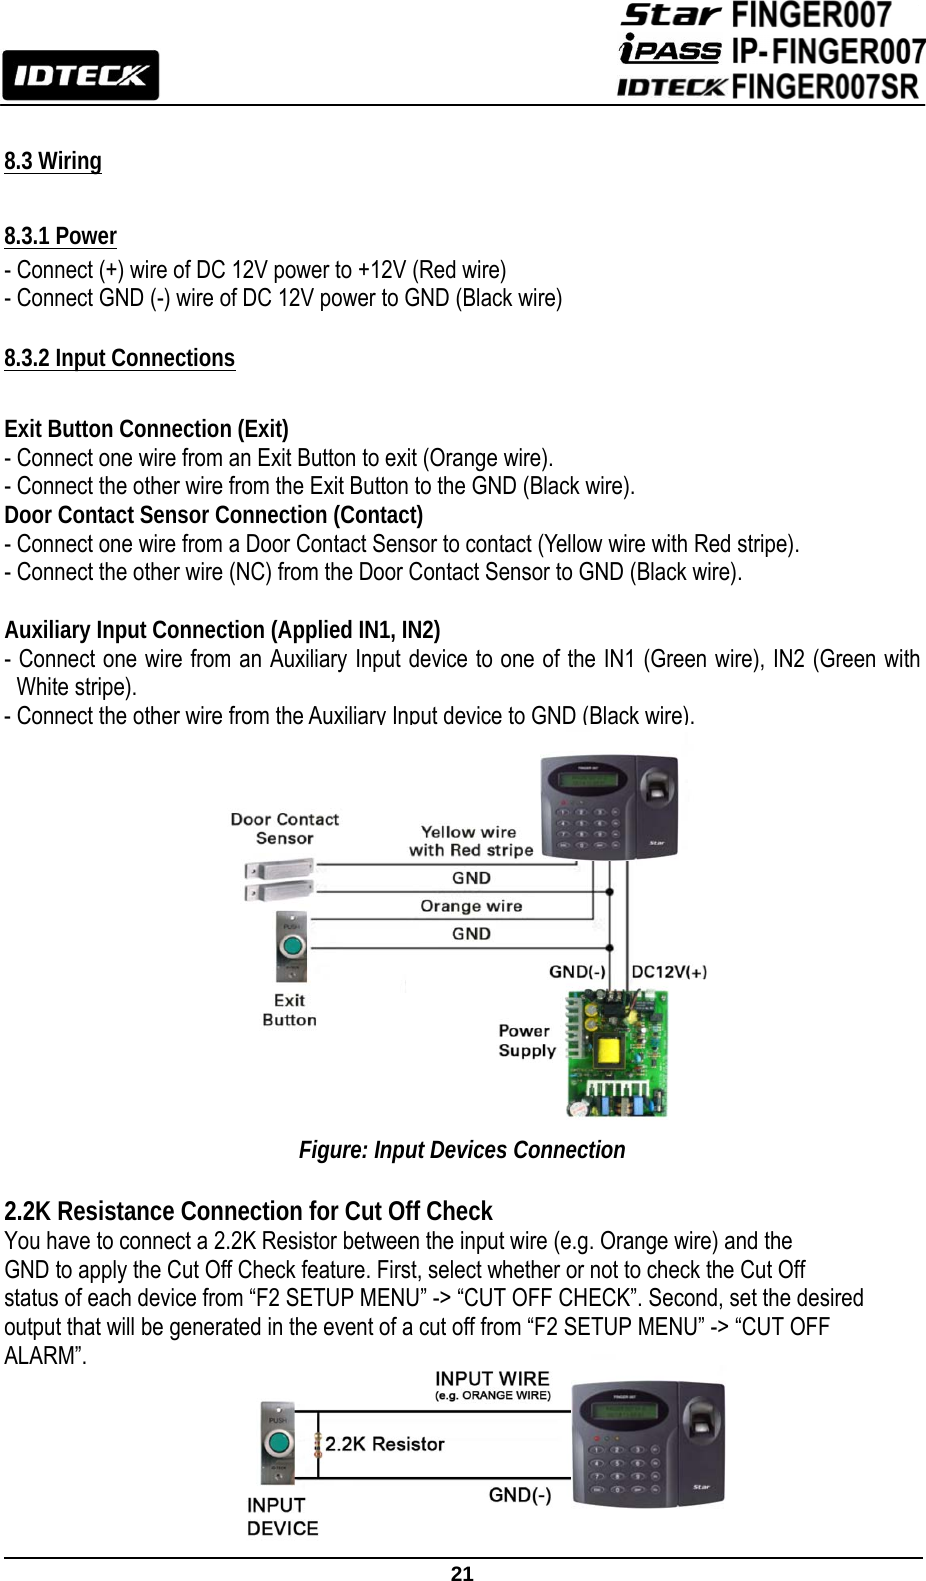                                                               21   8.3 Wiring  8.3.1 Power - Connect (+) wire of DC 12V power to +12V (Red wire)   - Connect GND (-) wire of DC 12V power to GND (Black wire)  8.3.2 Input Connections  Exit Button Connection (Exit) - Connect one wire from an Exit Button to exit (Orange wire). - Connect the other wire from the Exit Button to the GND (Black wire). Door Contact Sensor Connection (Contact)   - Connect one wire from a Door Contact Sensor to contact (Yellow wire with Red stripe). - Connect the other wire (NC) from the Door Contact Sensor to GND (Black wire).  Auxiliary Input Connection (Applied IN1, IN2) - Connect one wire from an Auxiliary Input device to one of the IN1 (Green wire), IN2 (Green with White stripe). - Connect the other wire from the Auxiliary Input device to GND (Black wire).               Figure: Input Devices Connection  2.2K Resistance Connection for Cut Off Check You have to connect a 2.2K Resistor between the input wire (e.g. Orange wire) and the GND to apply the Cut Off Check feature. First, select whether or not to check the Cut Off status of each device from “F2 SETUP MENU” -&gt; “CUT OFF CHECK”. Second, set the desired   output that will be generated in the event of a cut off from “F2 SETUP MENU” -&gt; “CUT OFF ALARM”.       